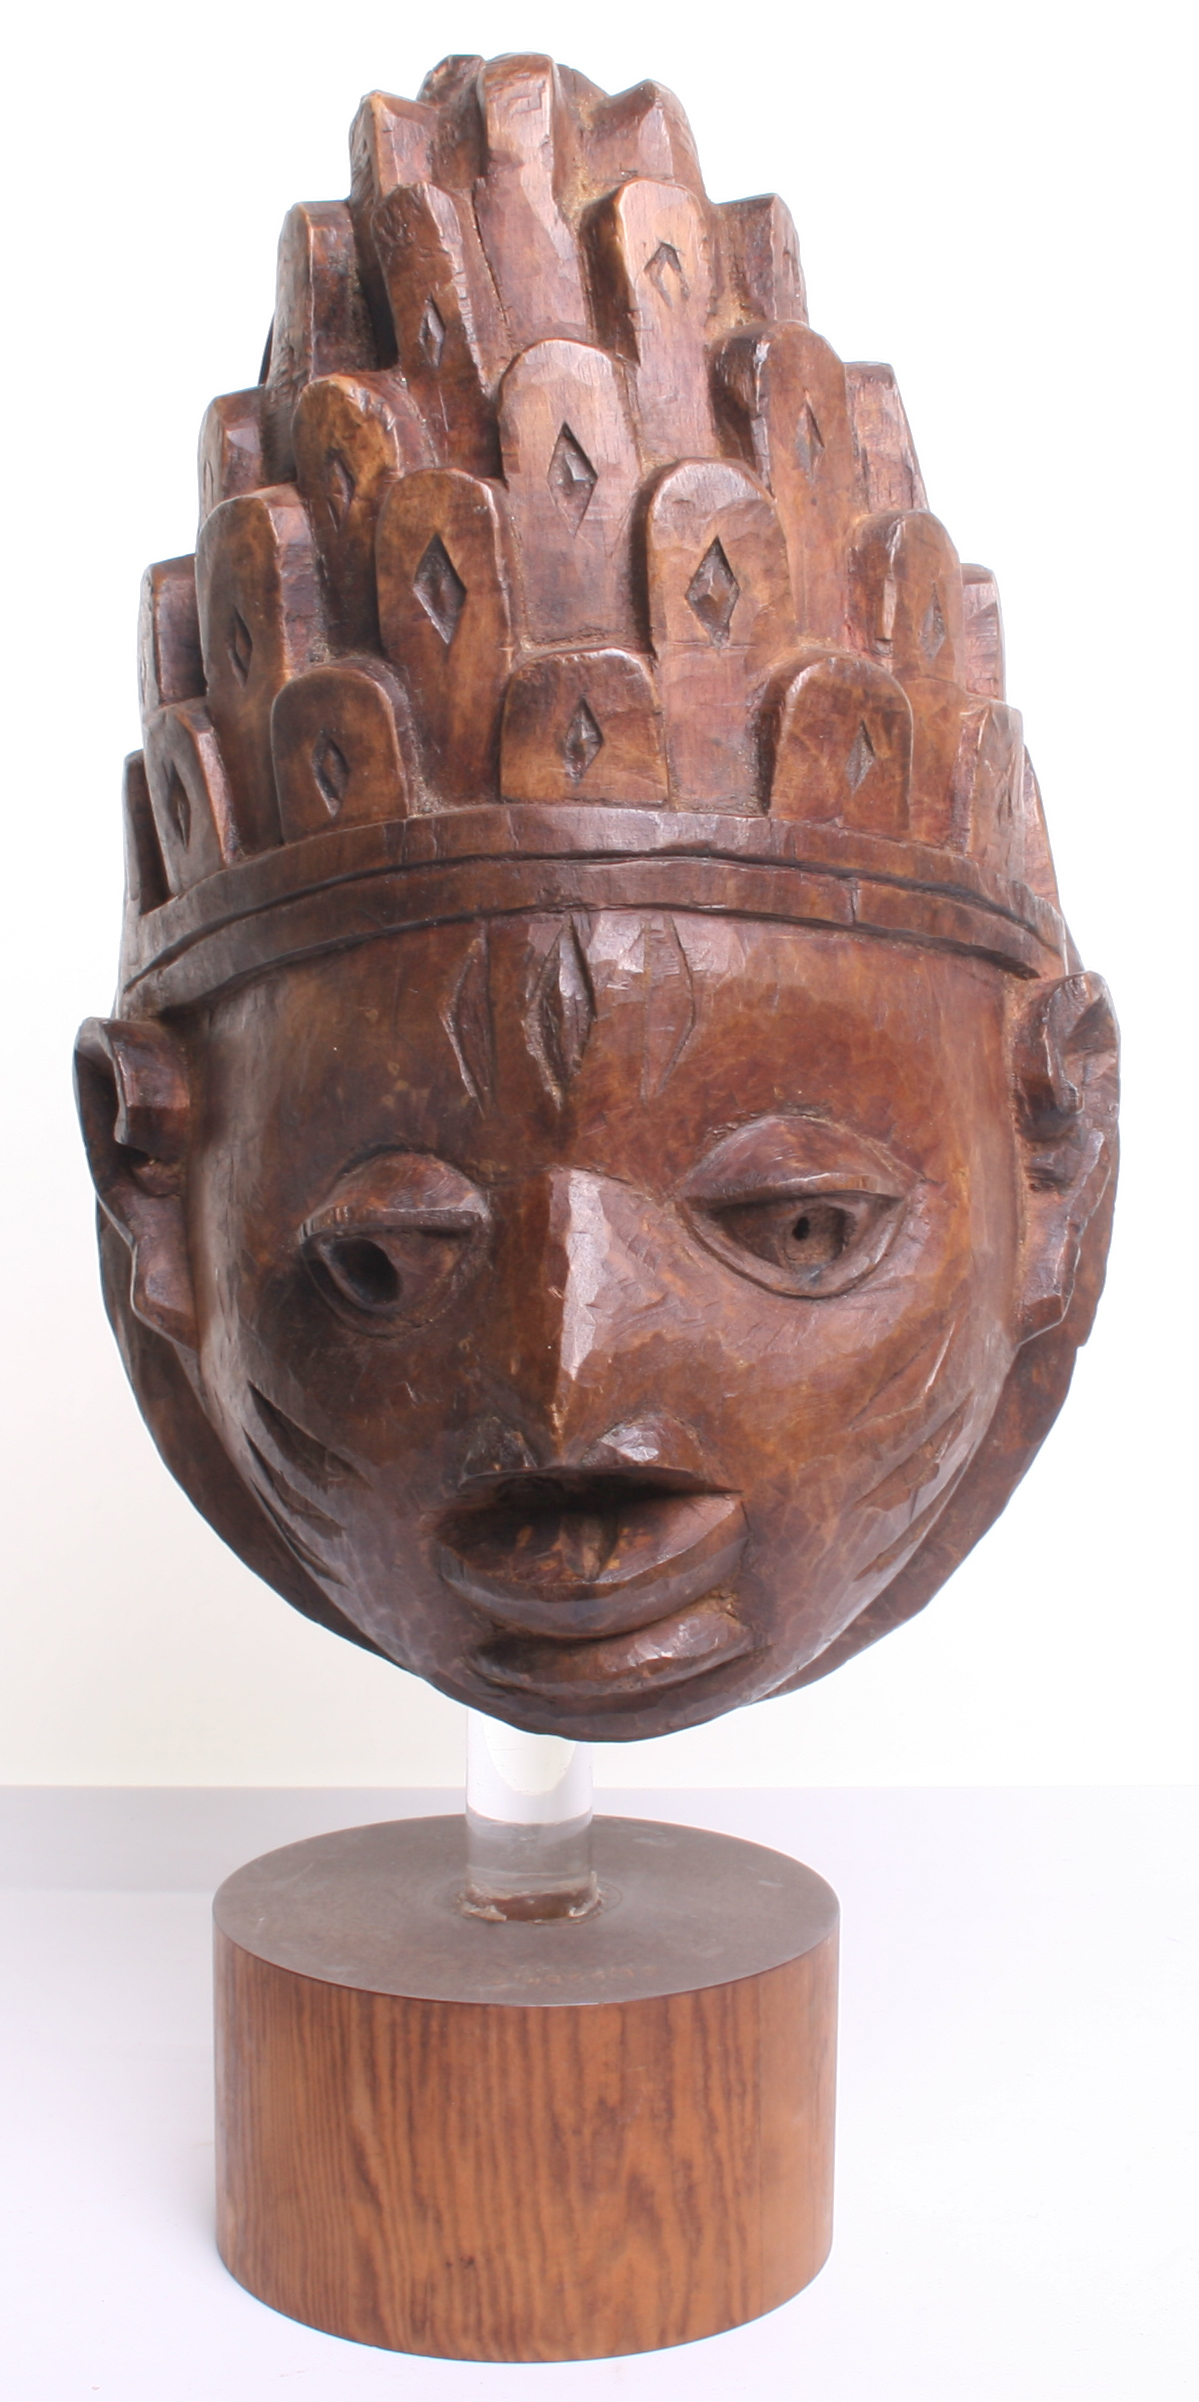 African Wooden Mask carved as a stylised human face, stained for effect, with tall crown of